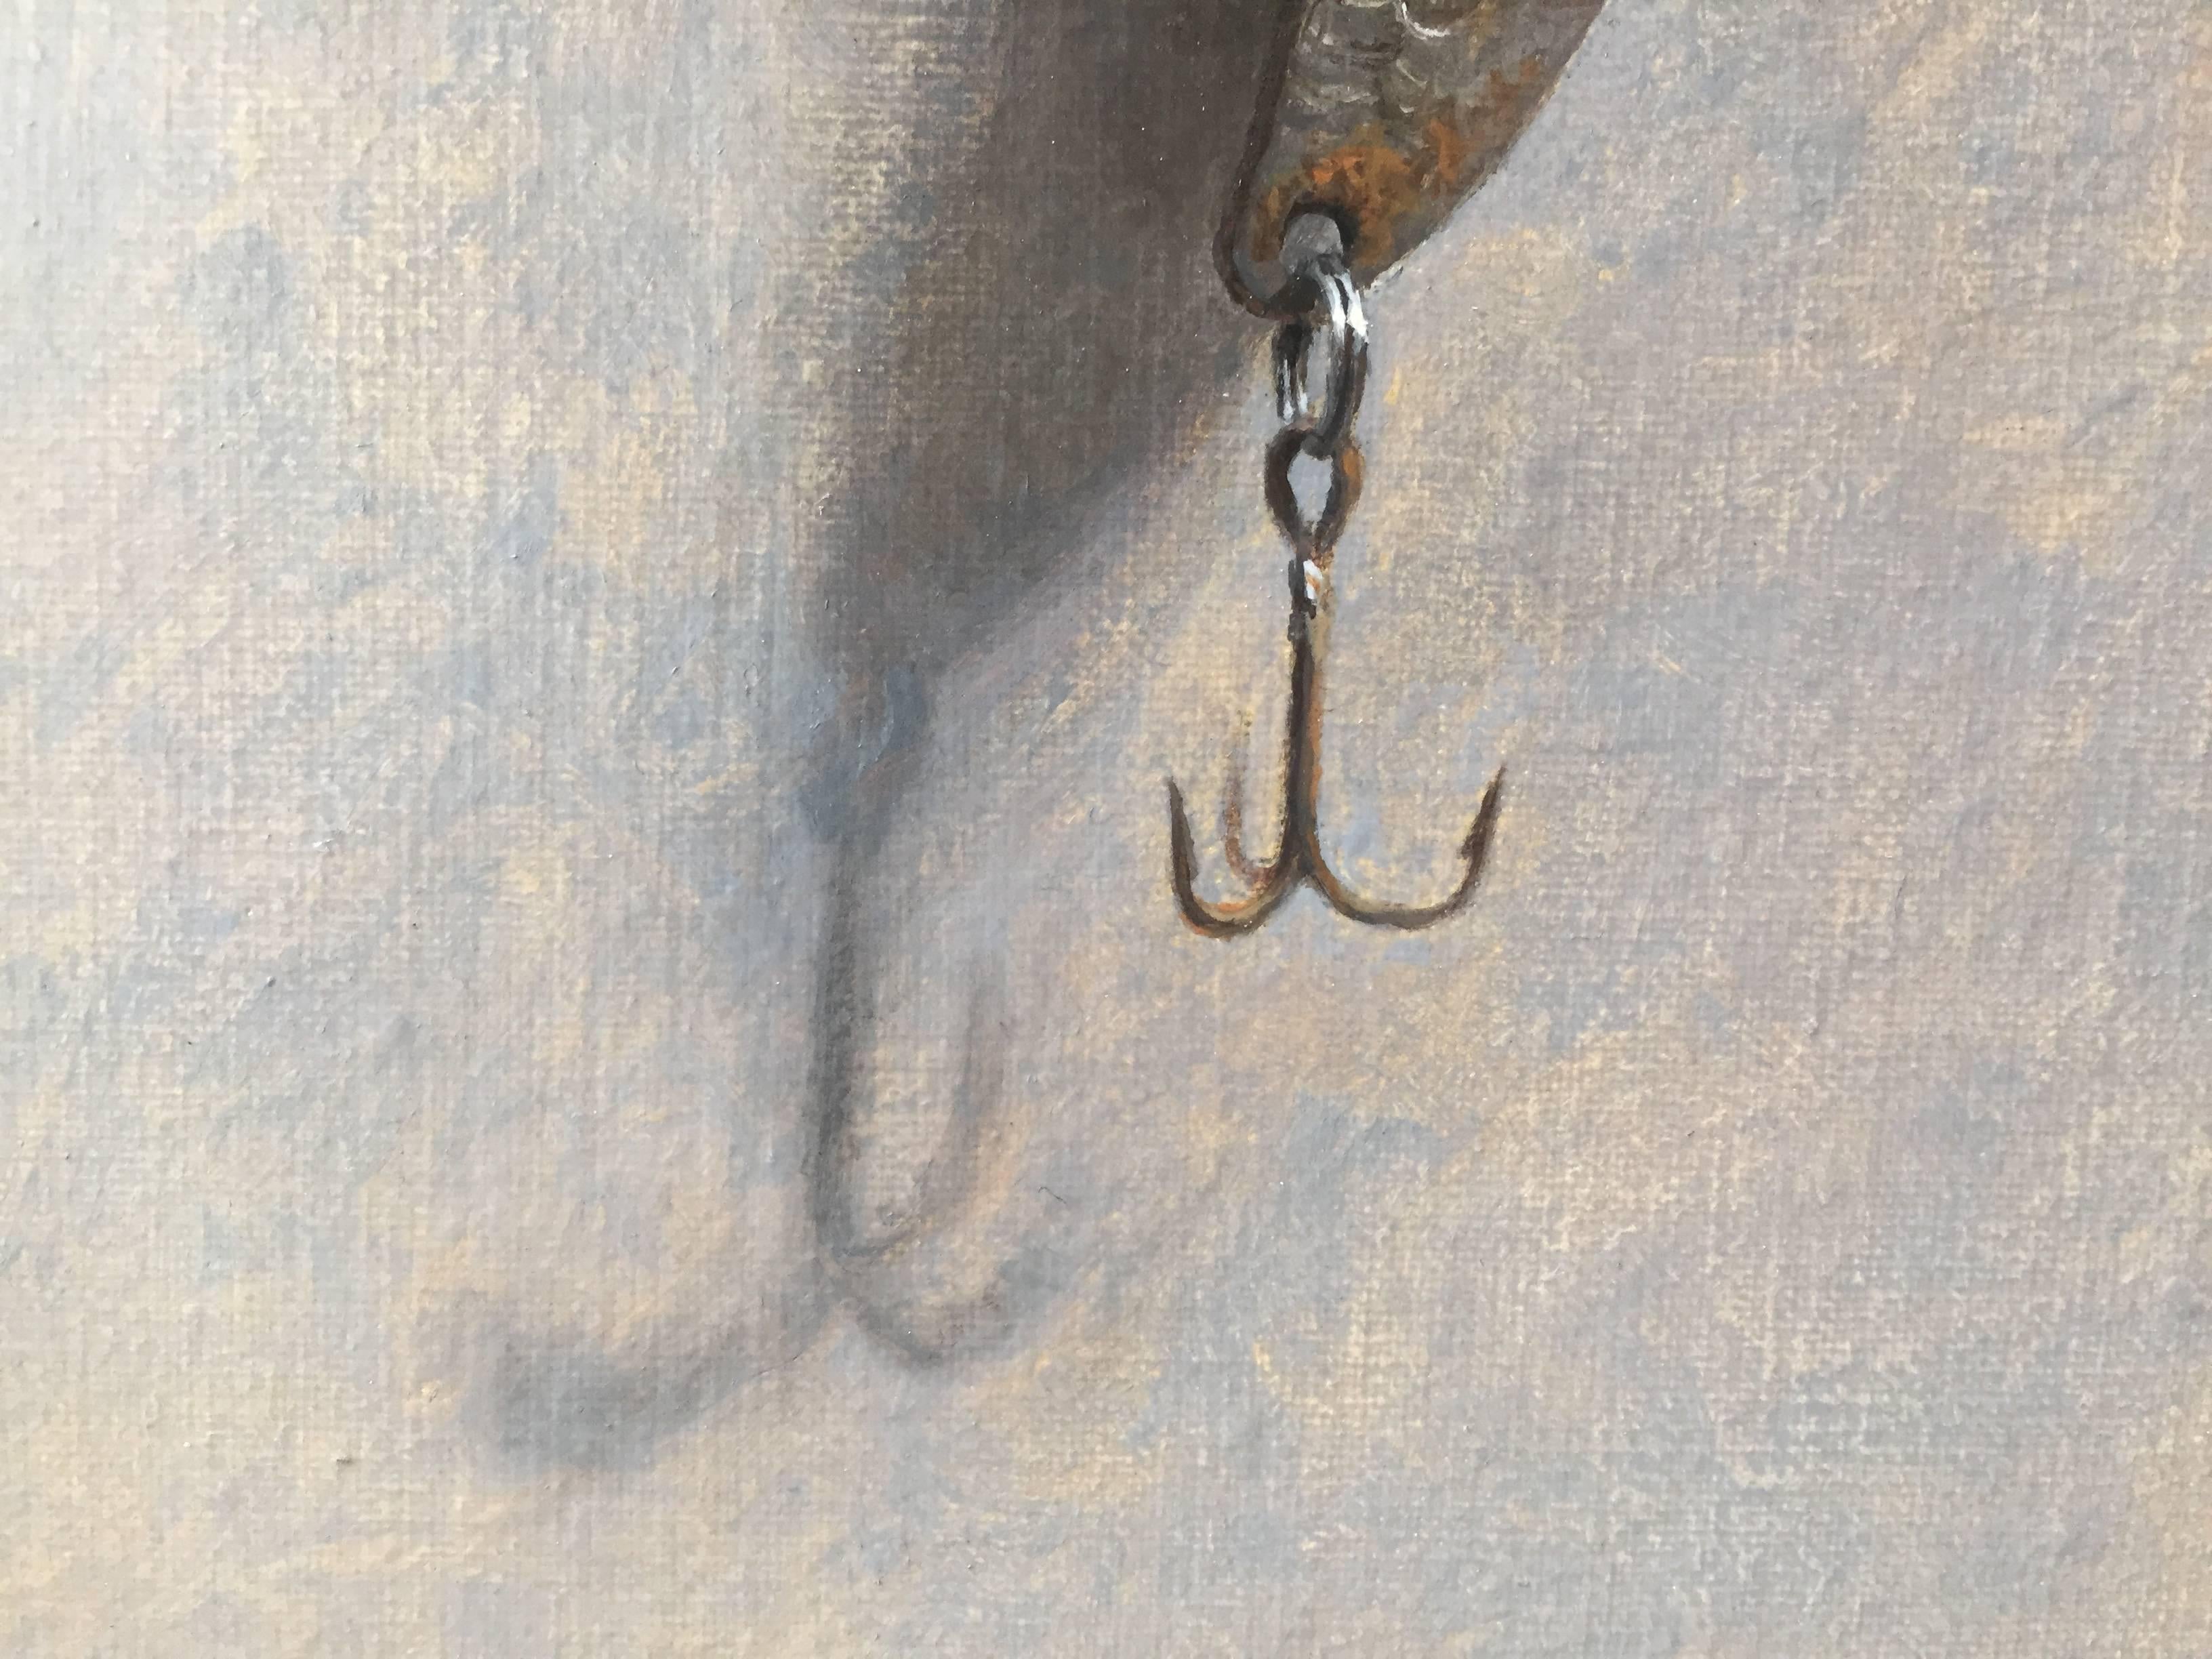 Painted from life, a trompe l'oeil oil painting of a small, rusted silver fishing lure. Hanging from a tiny metal nail, and dangling from a thin white fishing line, Morfis presents to us his aptitude for intricacy. Highlighting a rusted object